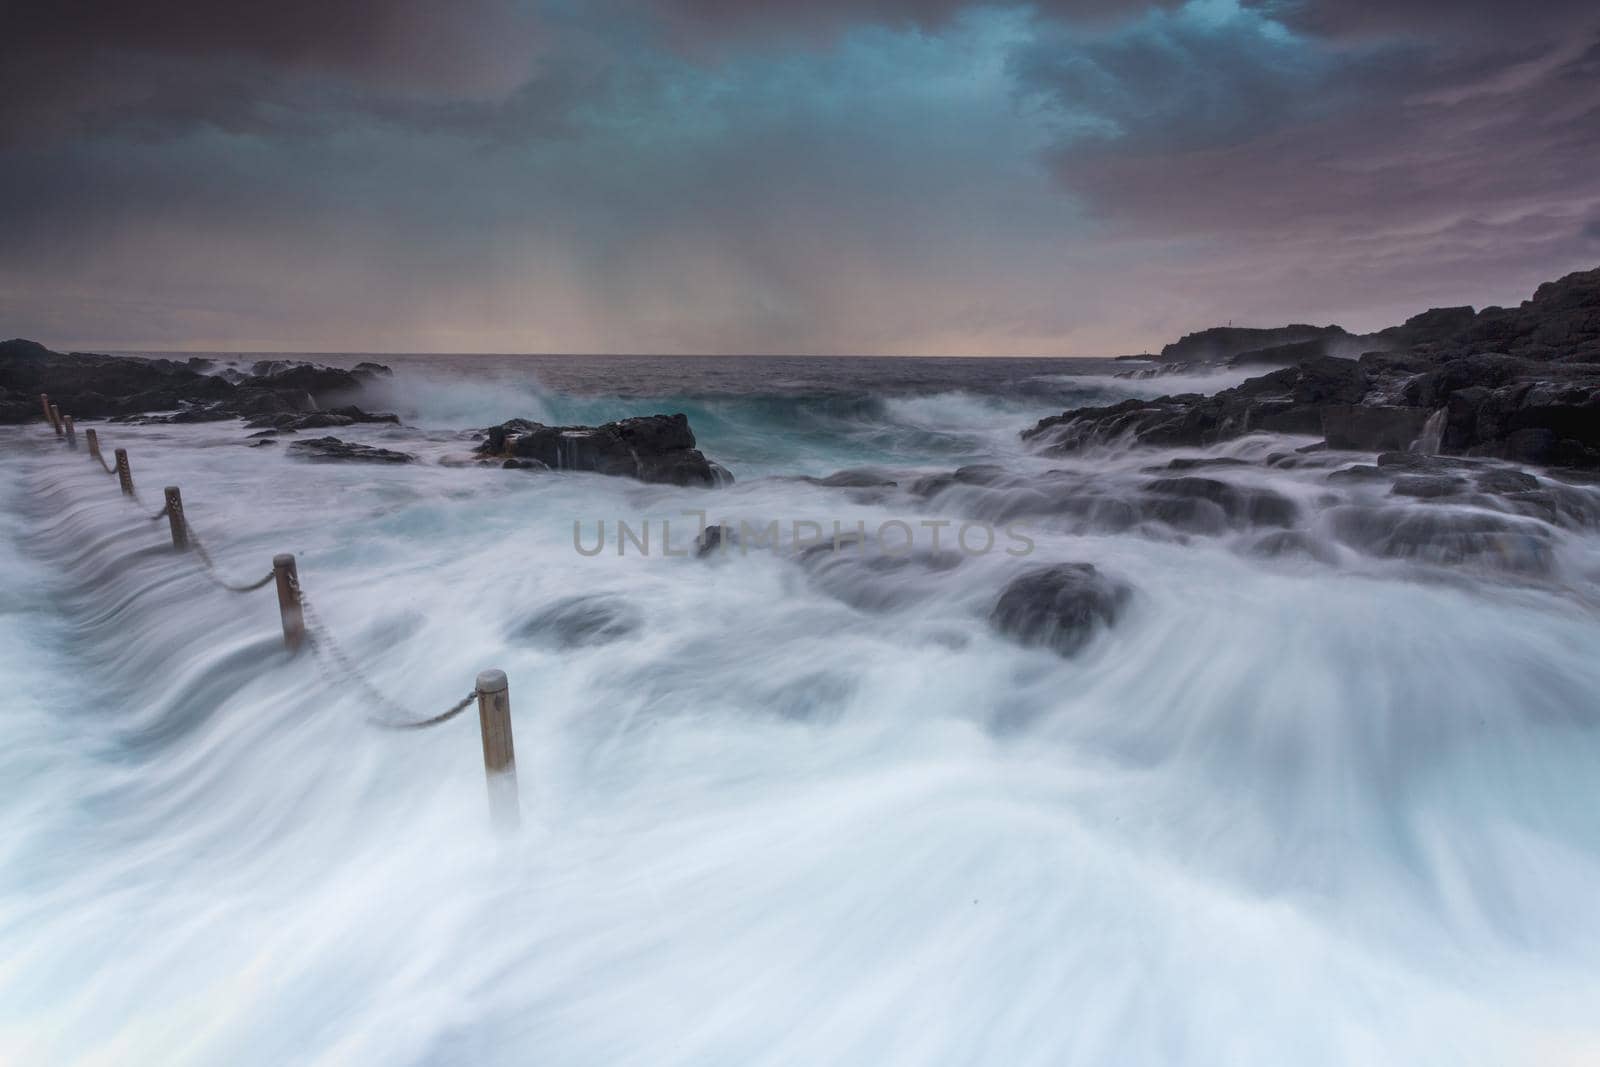 Large waves huge volume of water flowing over rocks and into rock pool, 
Long exposure with sunrise and rain clouds